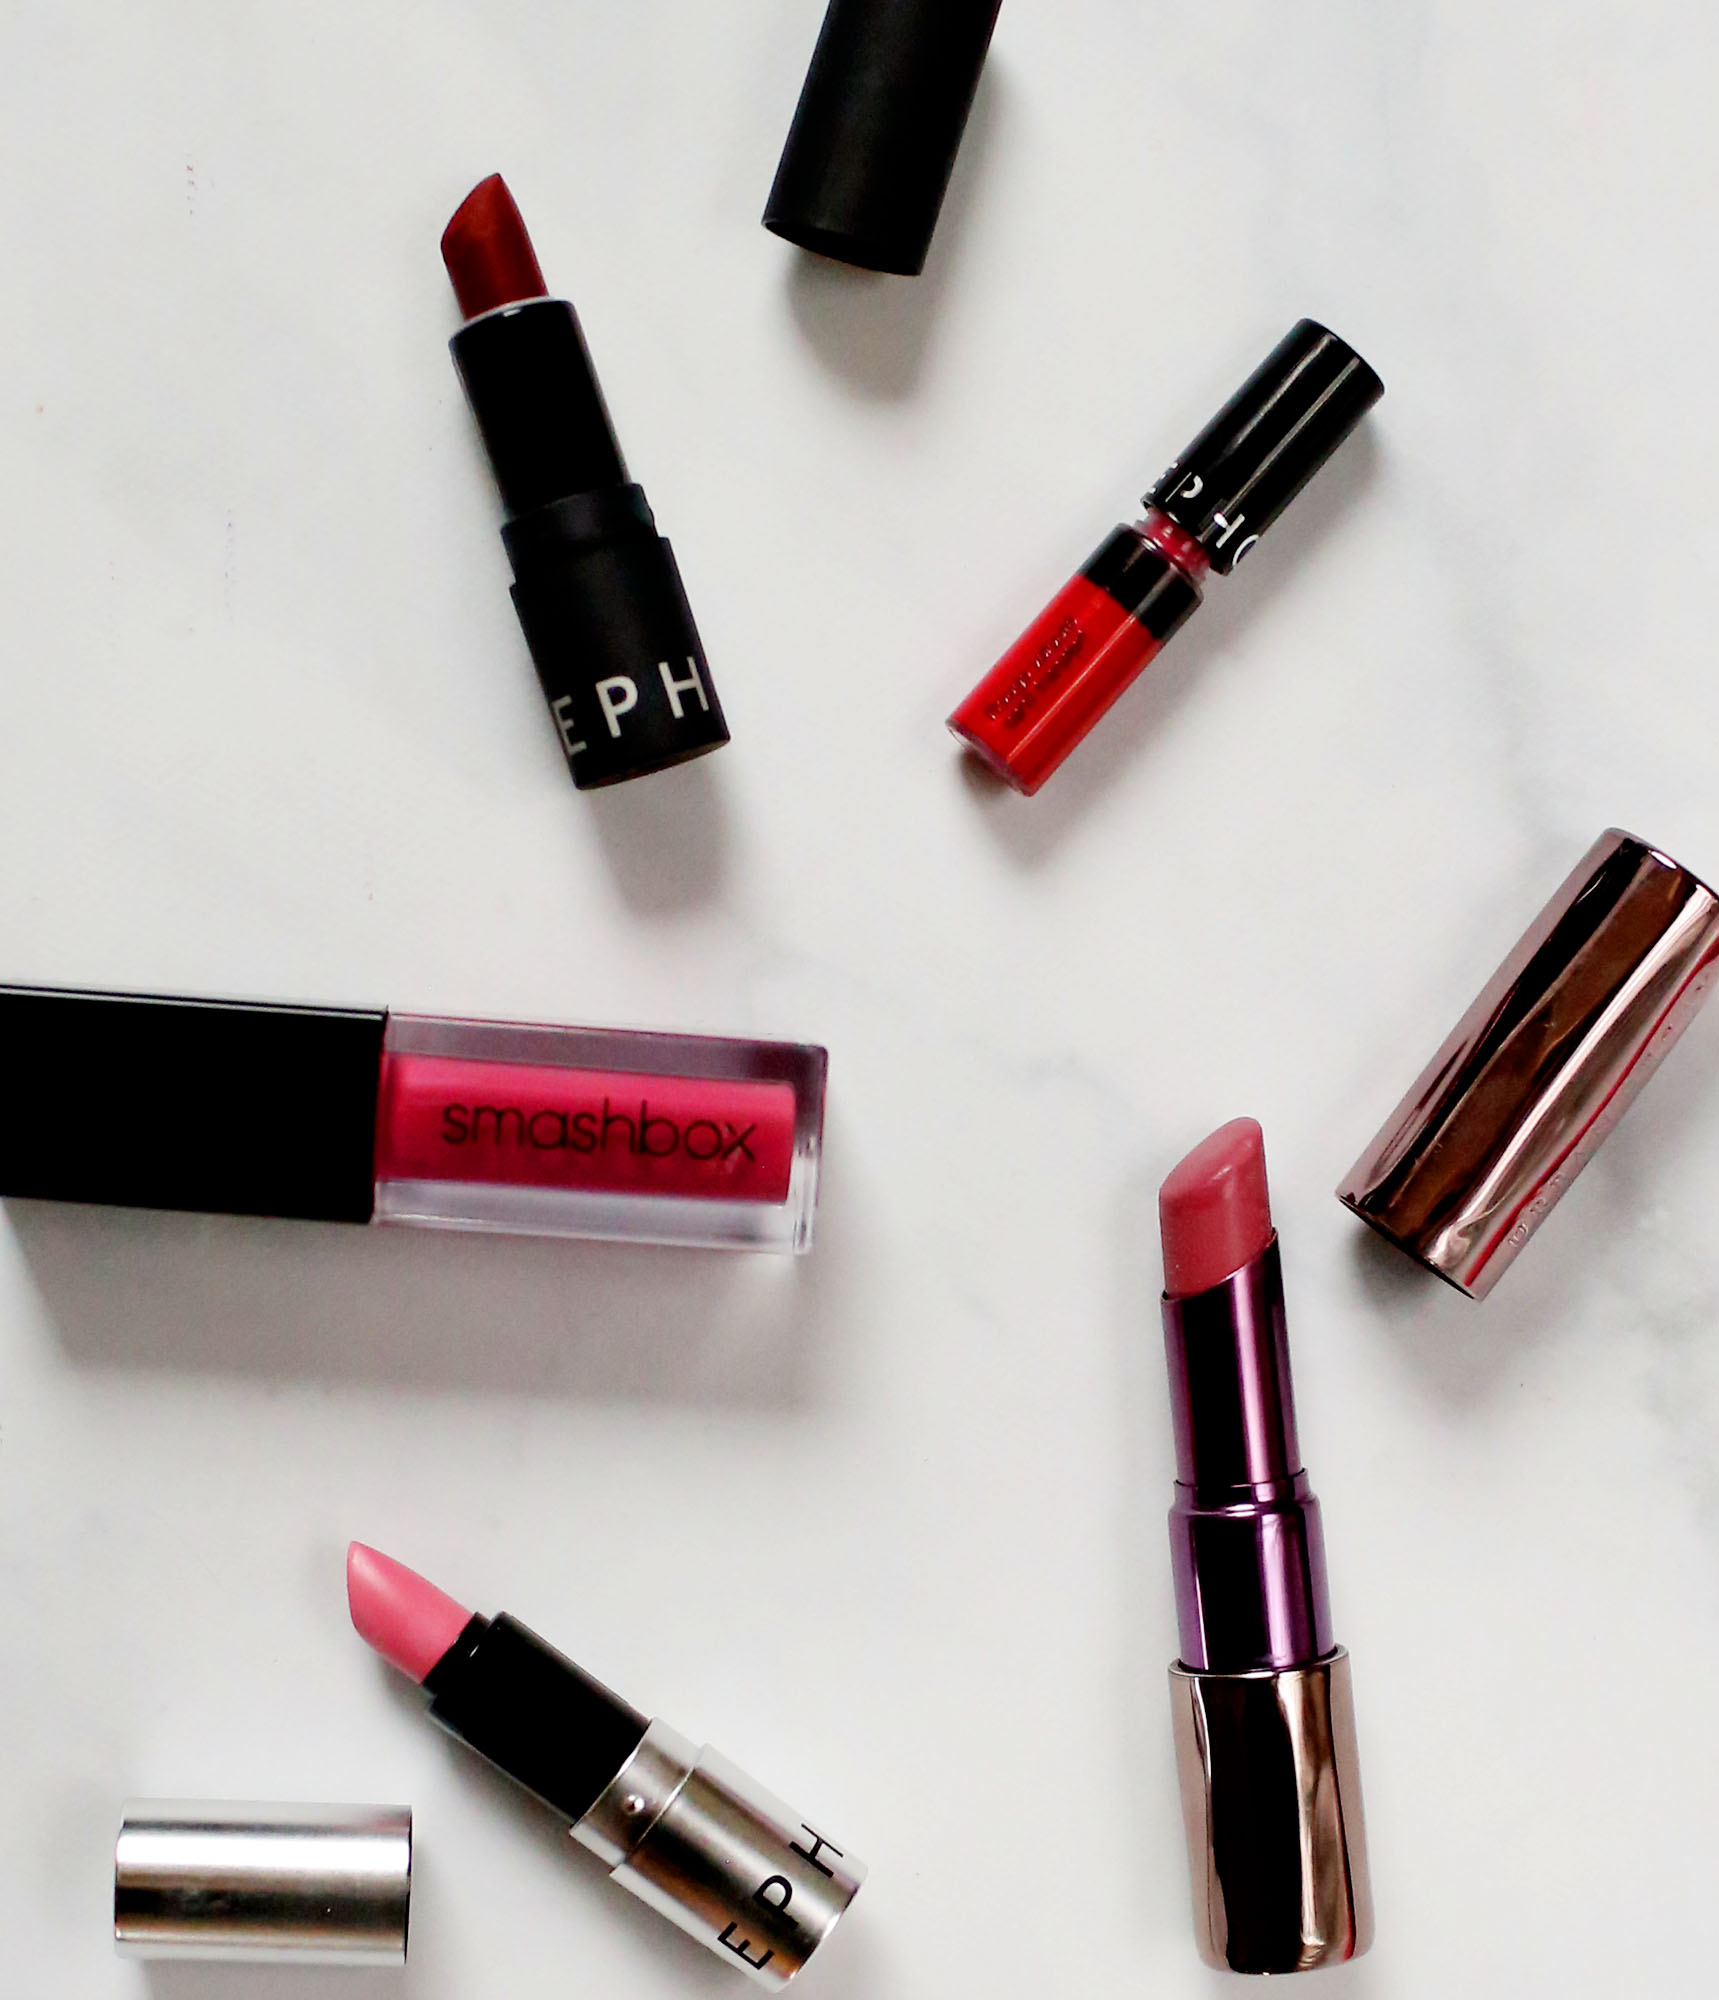 So many swatches, so little time. Shop your lipstick stash and try on that bold lip you've been wanting to wear! Via Lily & Val Living